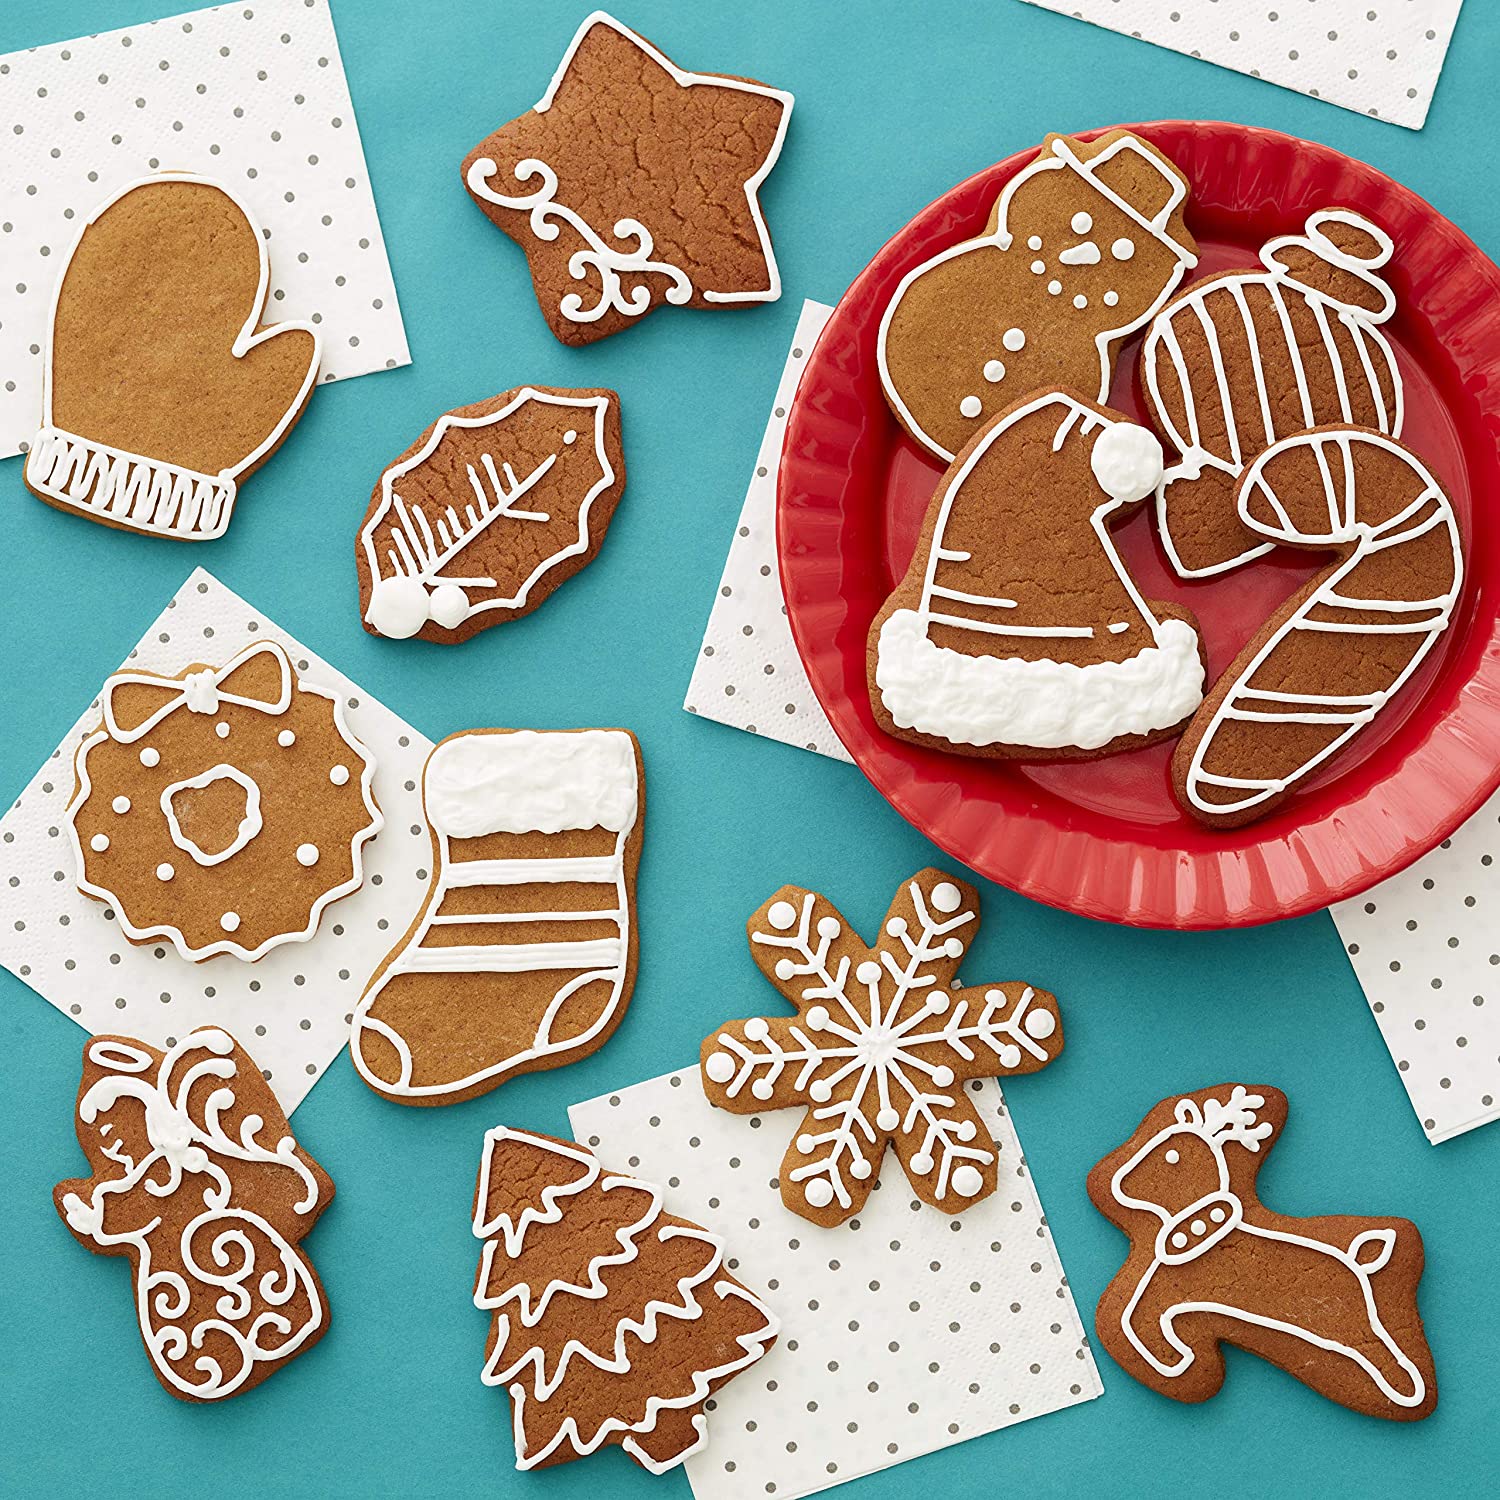 Wilton Holiday Shapes Metal Christmas Cookie Cutter Set, 18-Piece